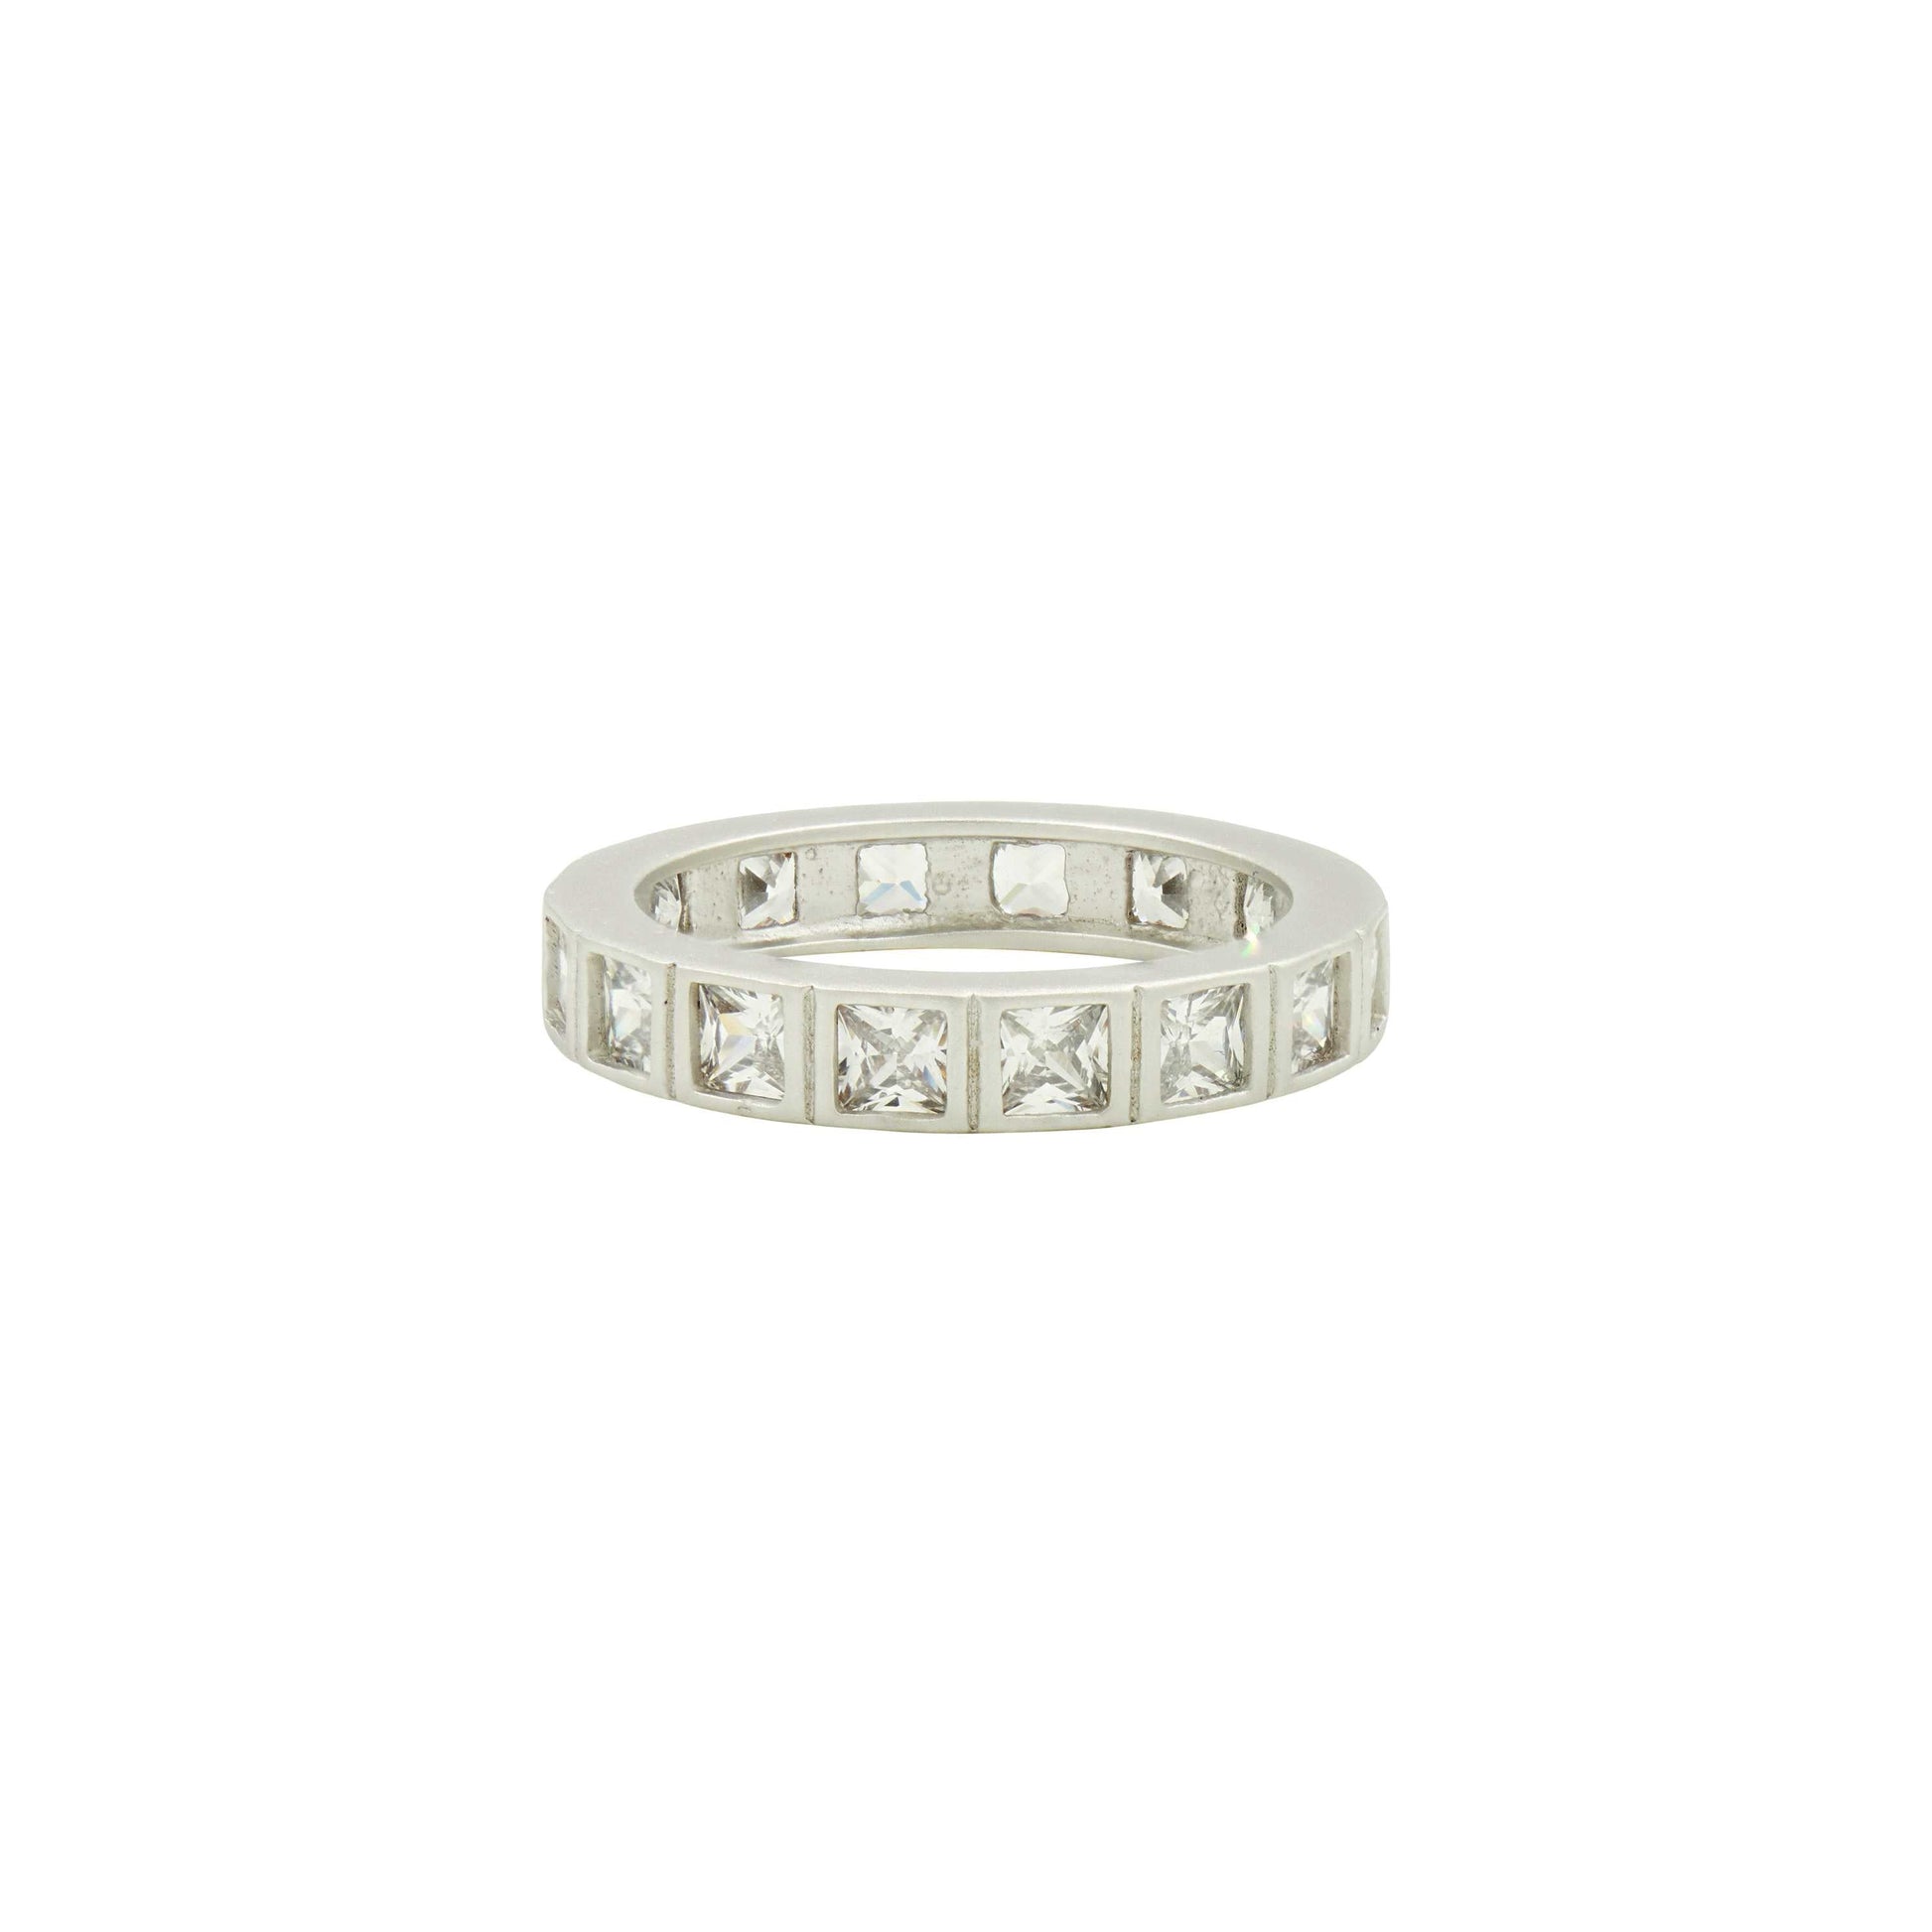 Silver9 Square Radiance Ring RINGS FOR STACKING RING